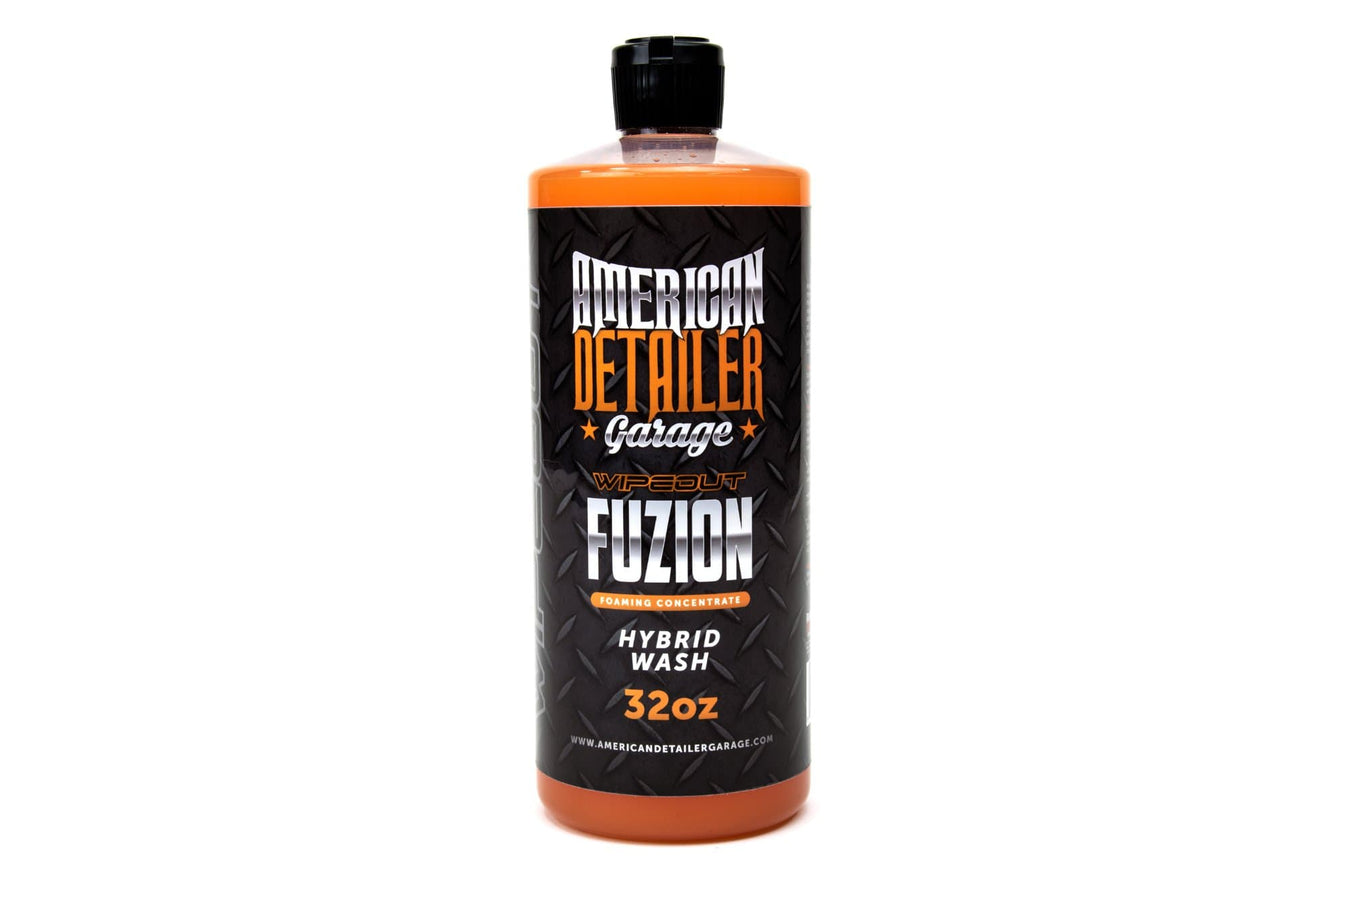 Fuzion Hybrid Foaming Wash Concentrate - by American Detailer Garage